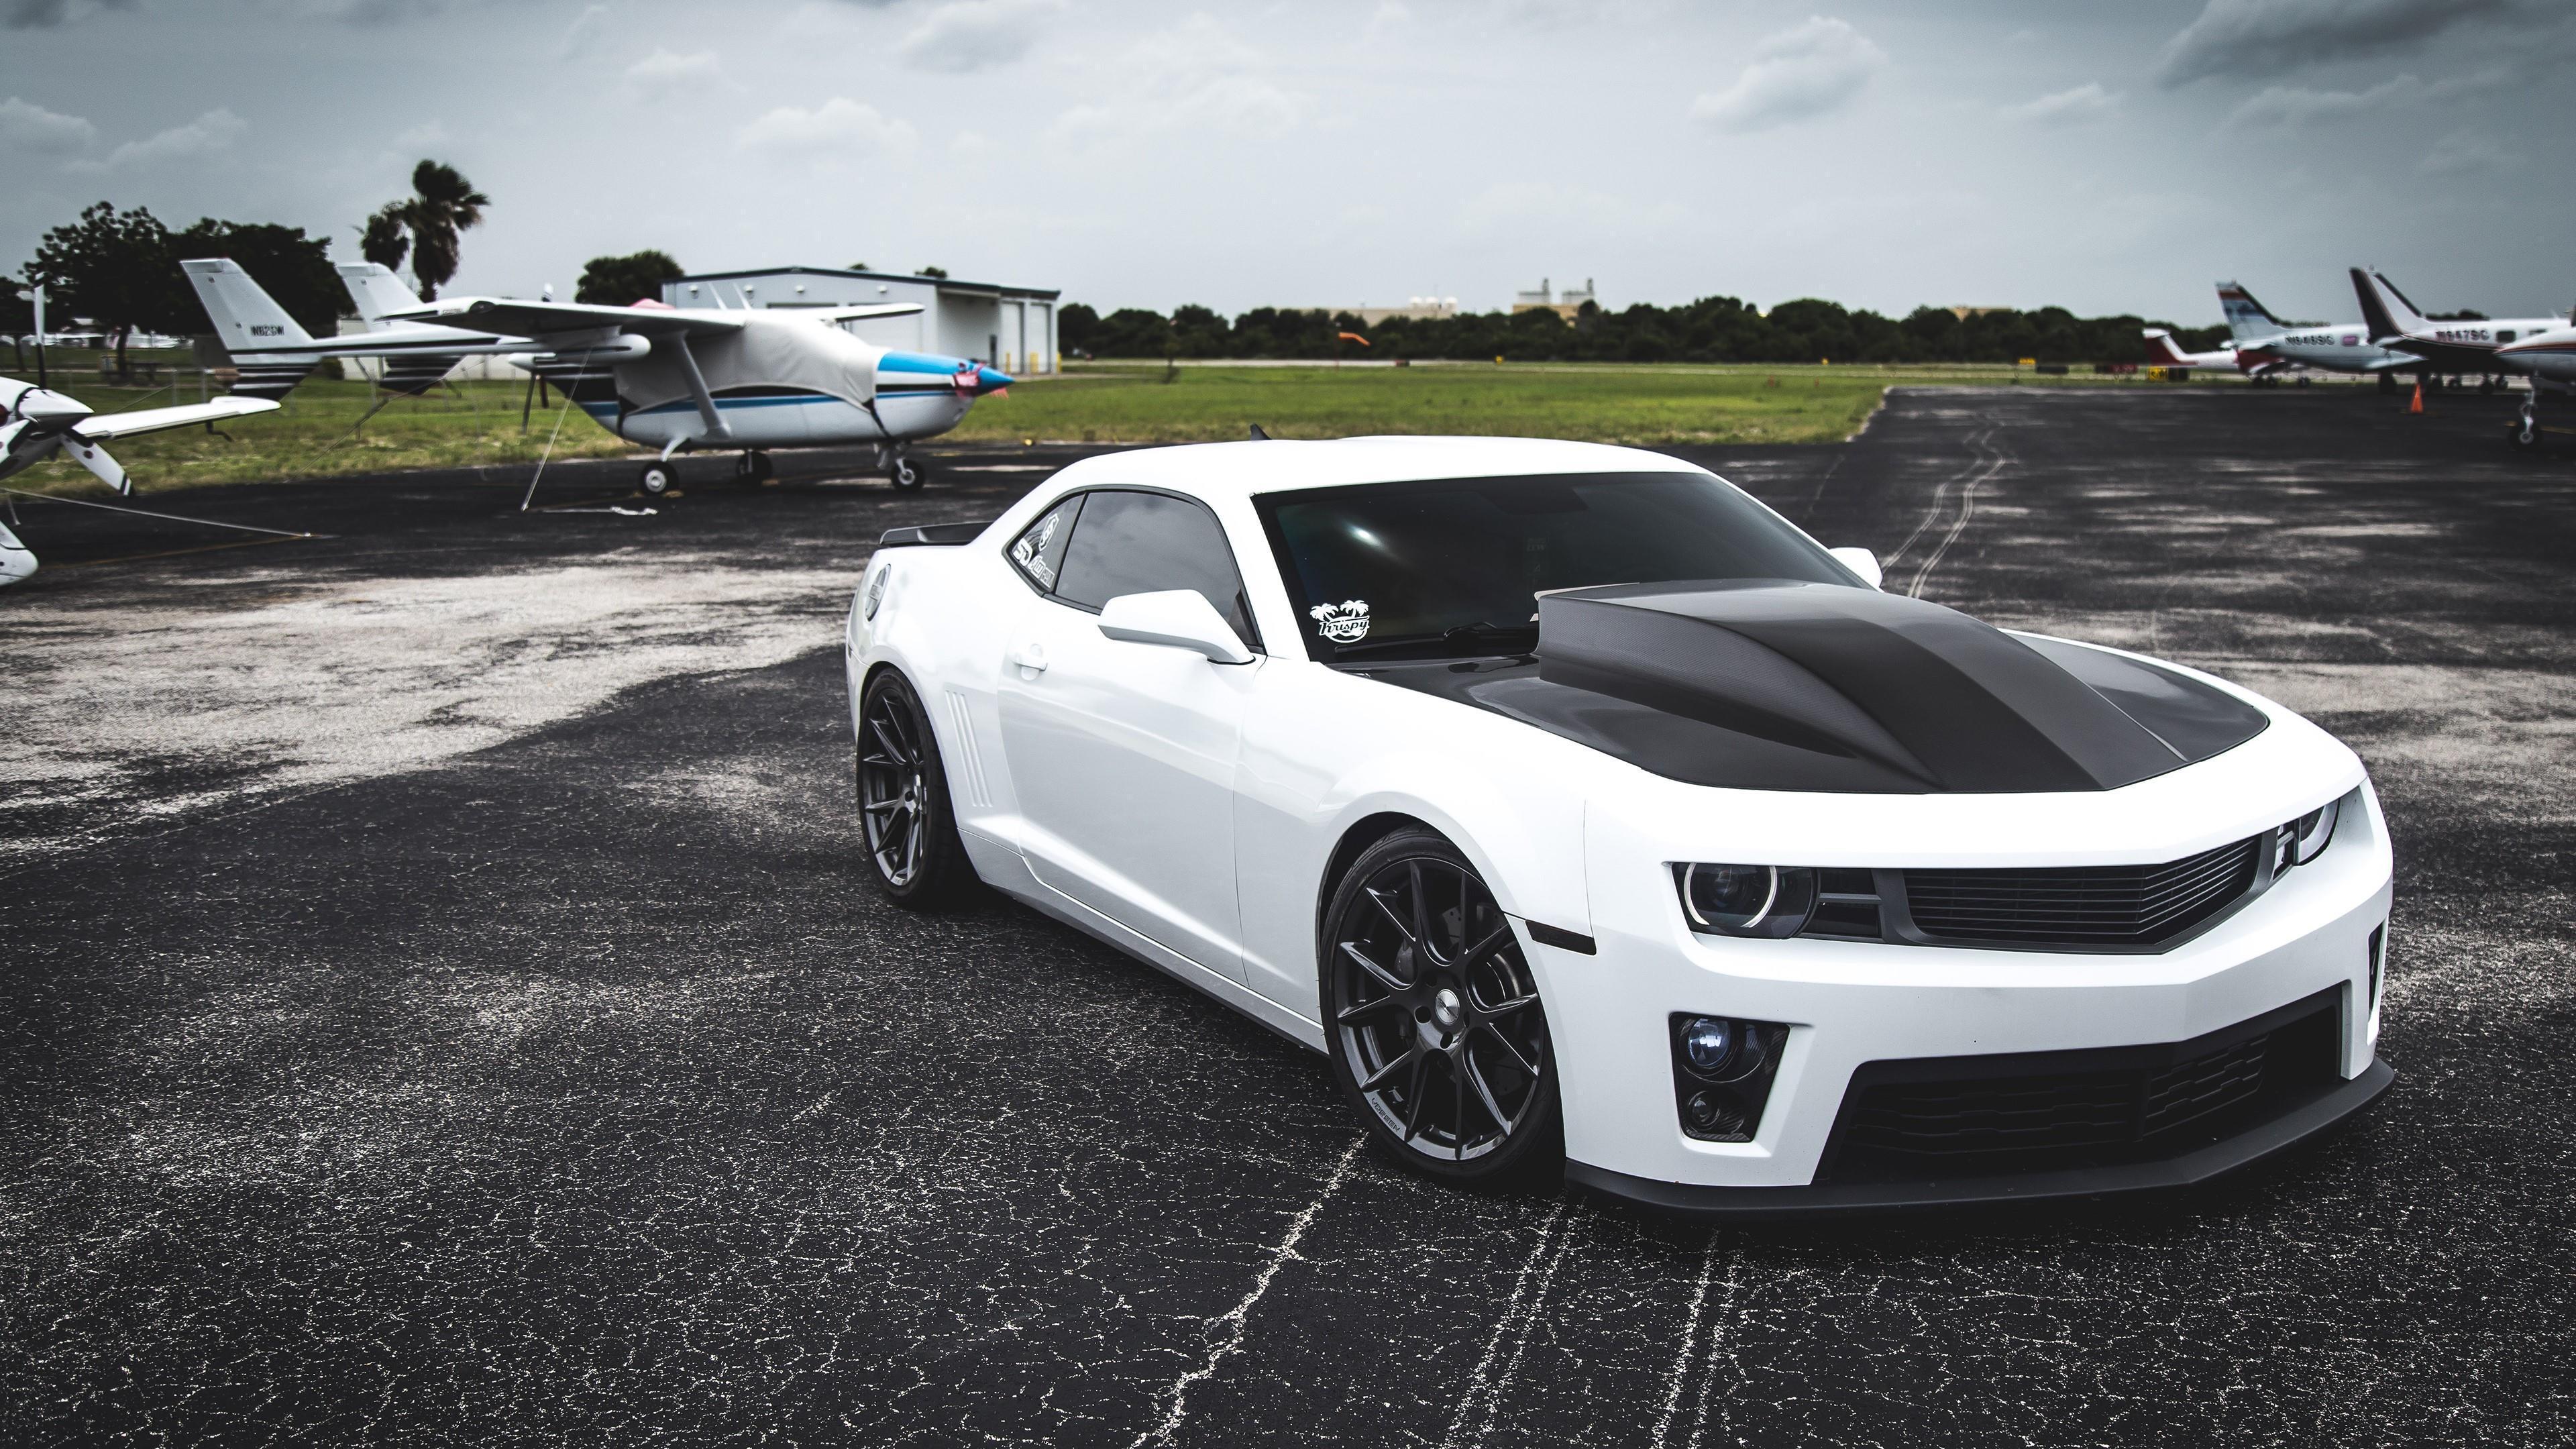 The Exorcist Hennessey Camaro Zl1 Wallpaper By Favorisxp